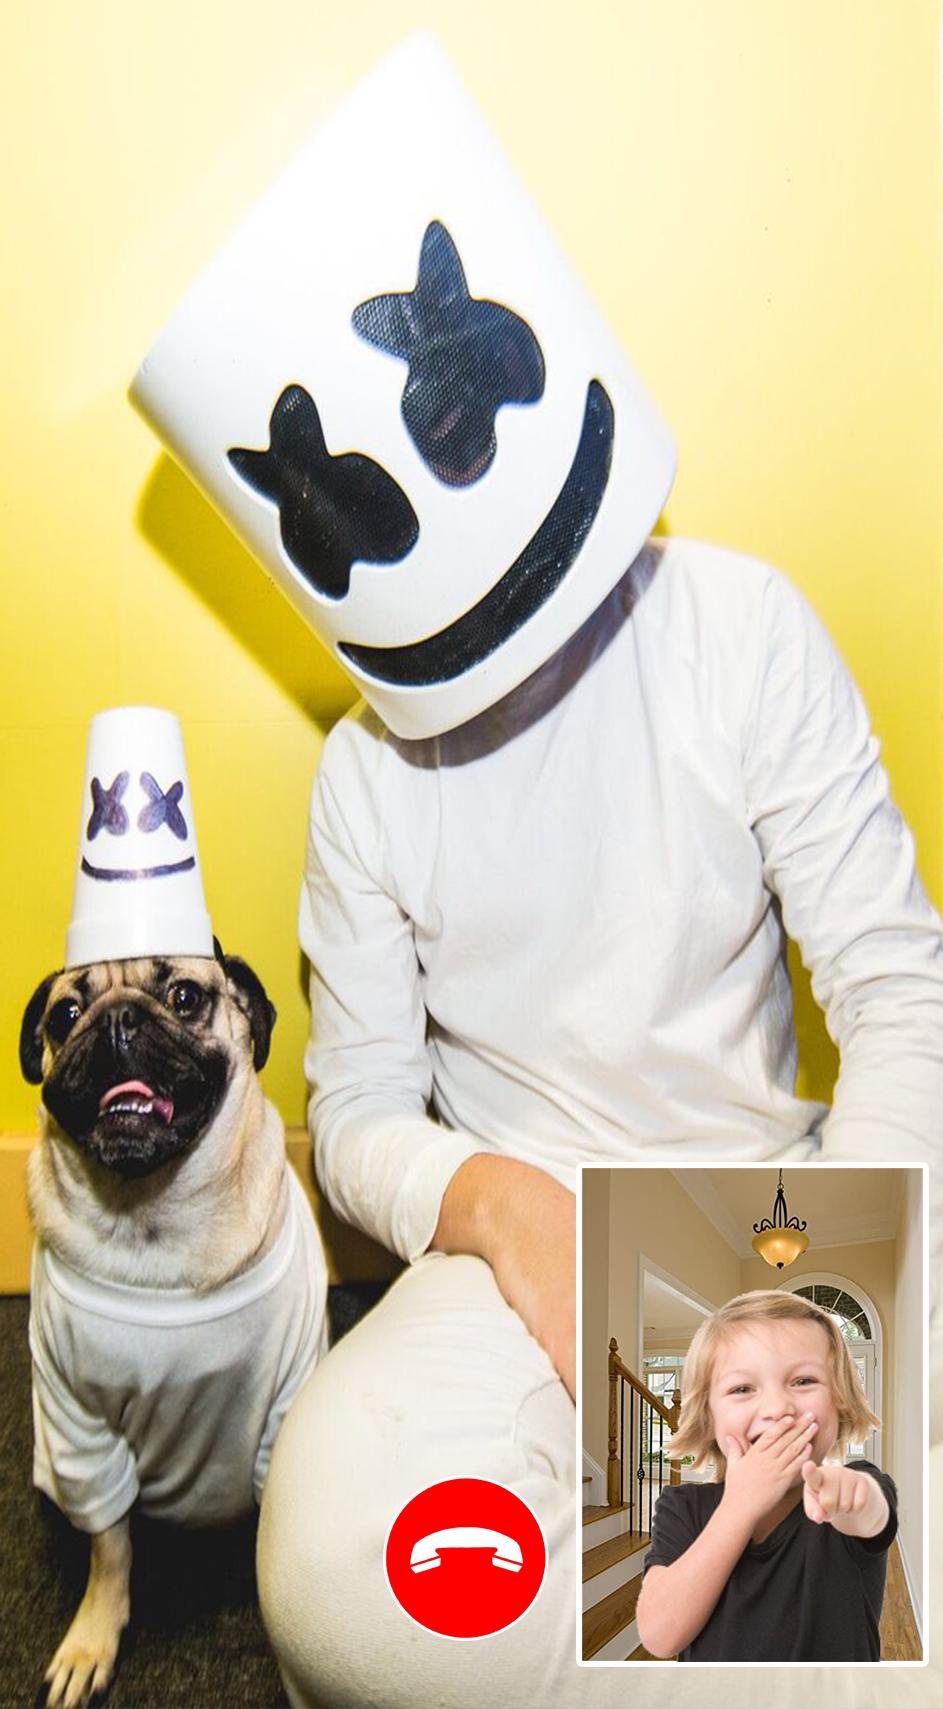 Marshmello Dj Call Video Chat Sumilator For Android Apk Download